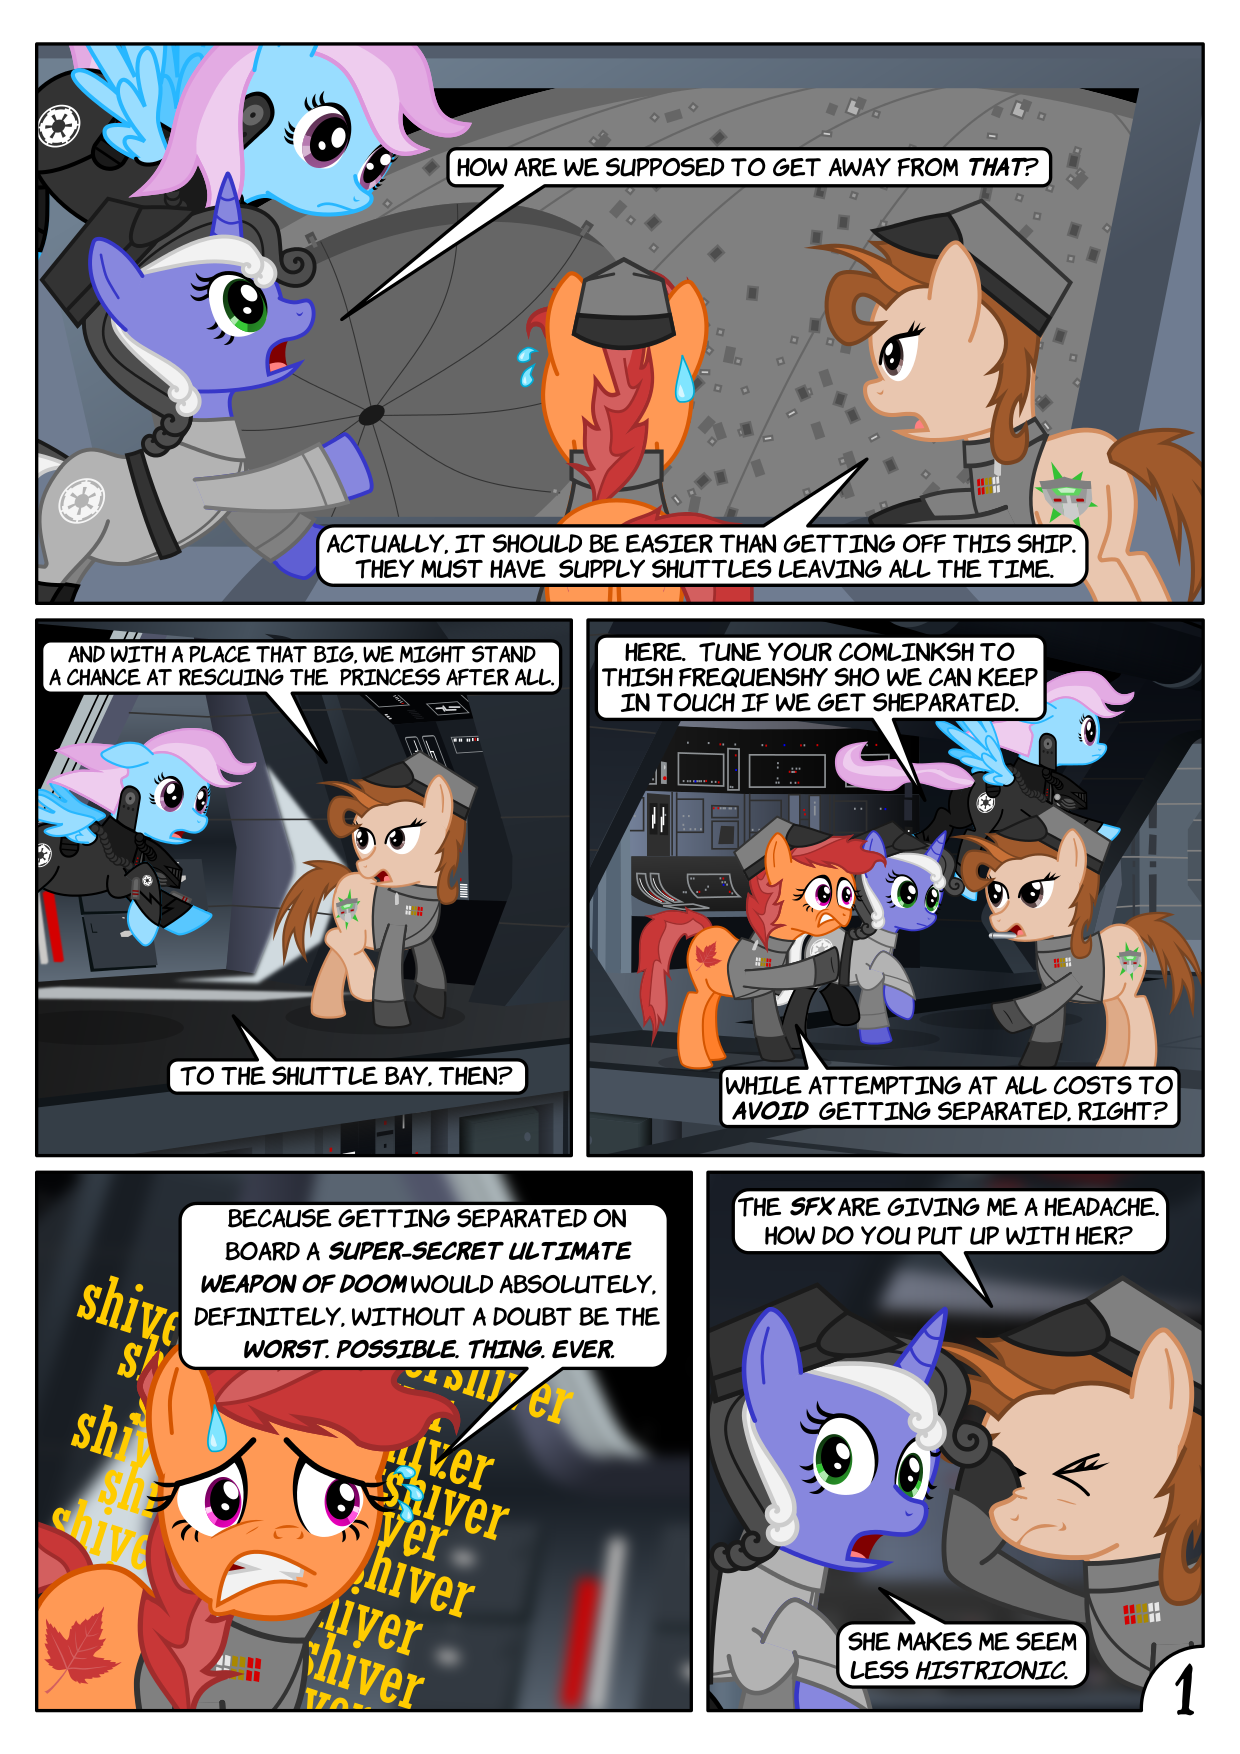 Star Mares 1.2 .1: All According to Plan